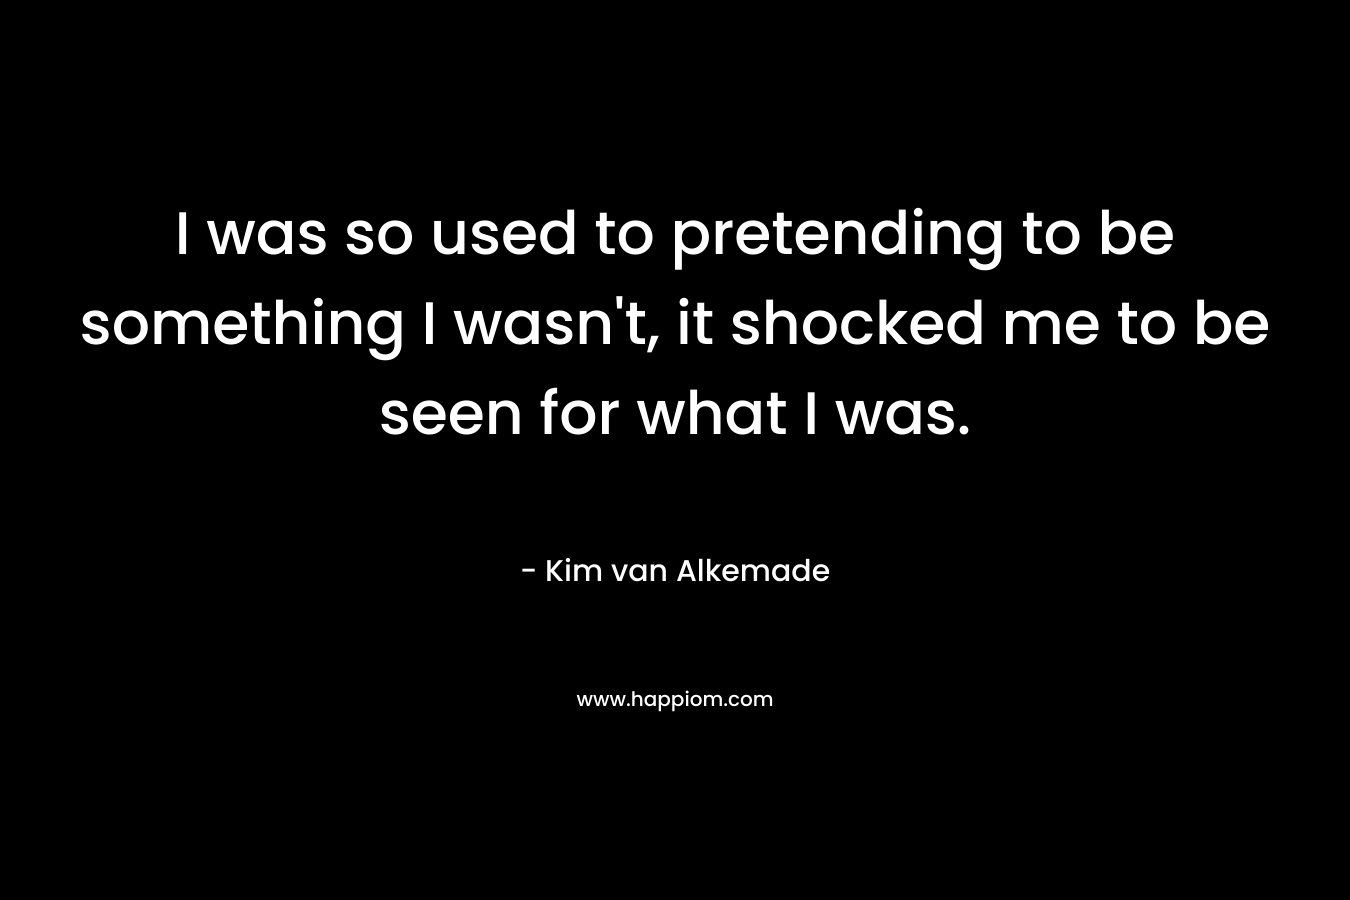 I was so used to pretending to be something I wasn’t, it shocked me to be seen for what I was. – Kim van Alkemade